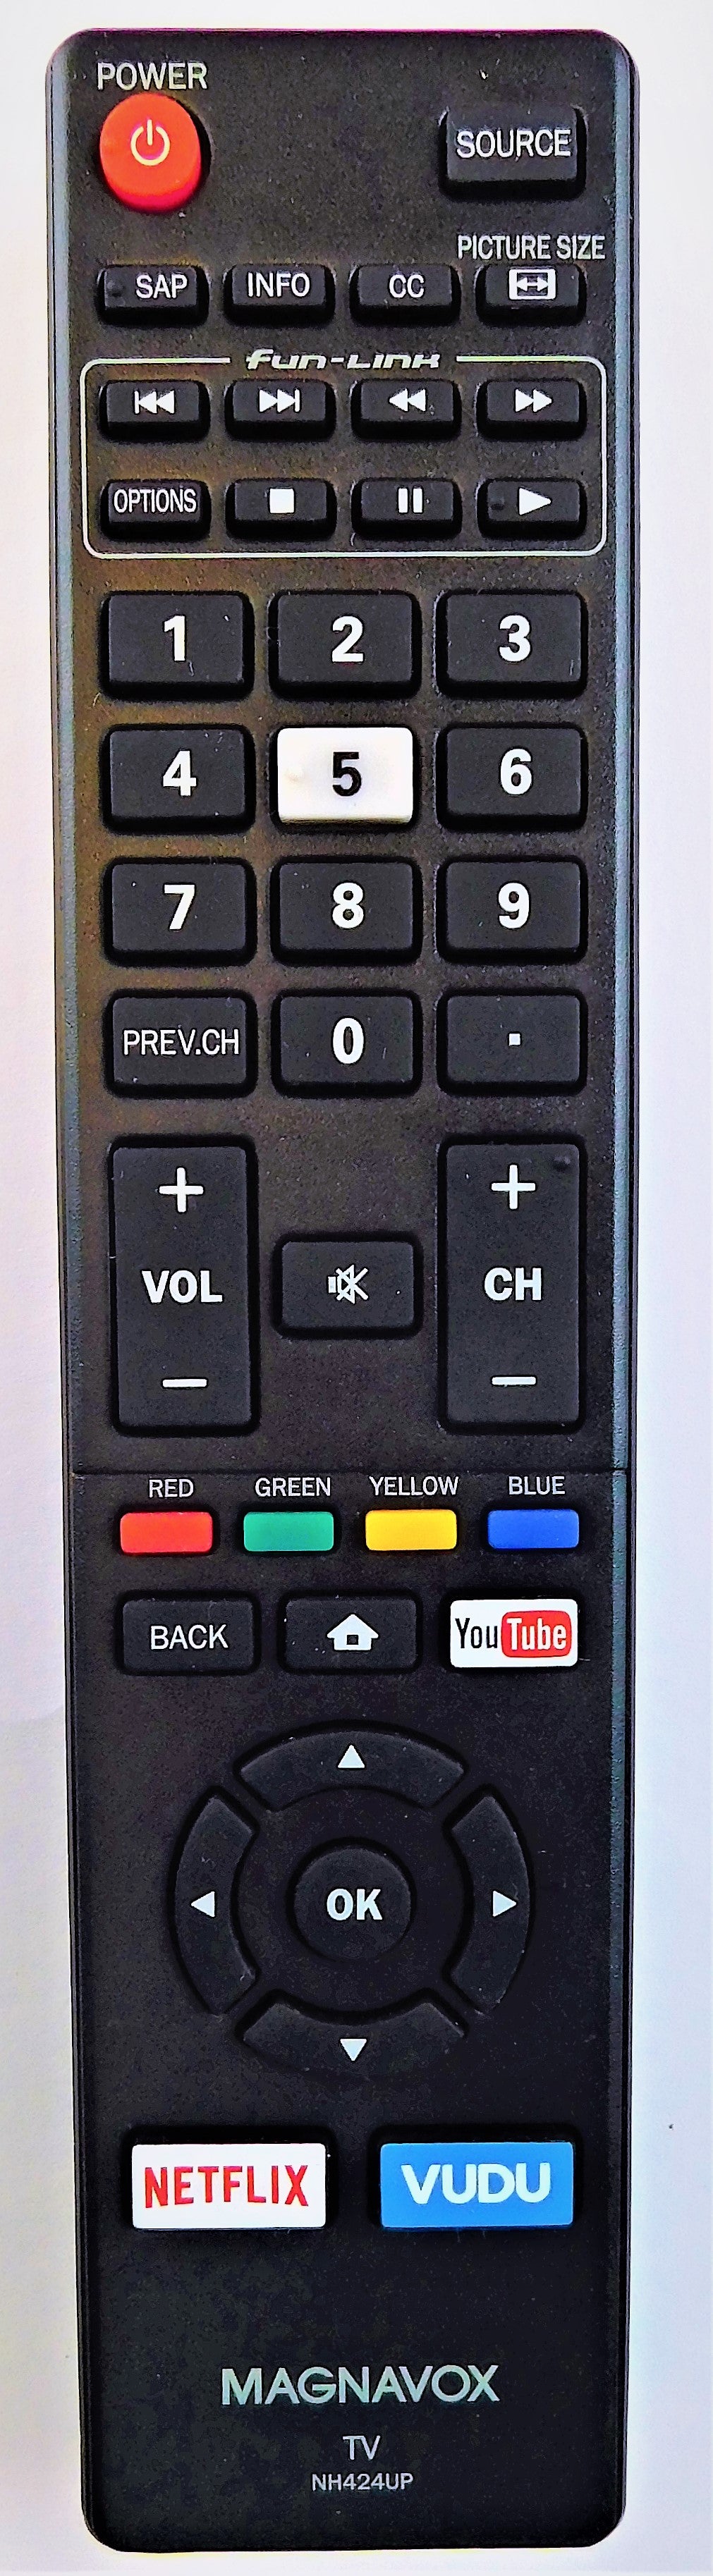 Original OEM replacement remote control for Magnavox LED/LCD TVs NH424UP